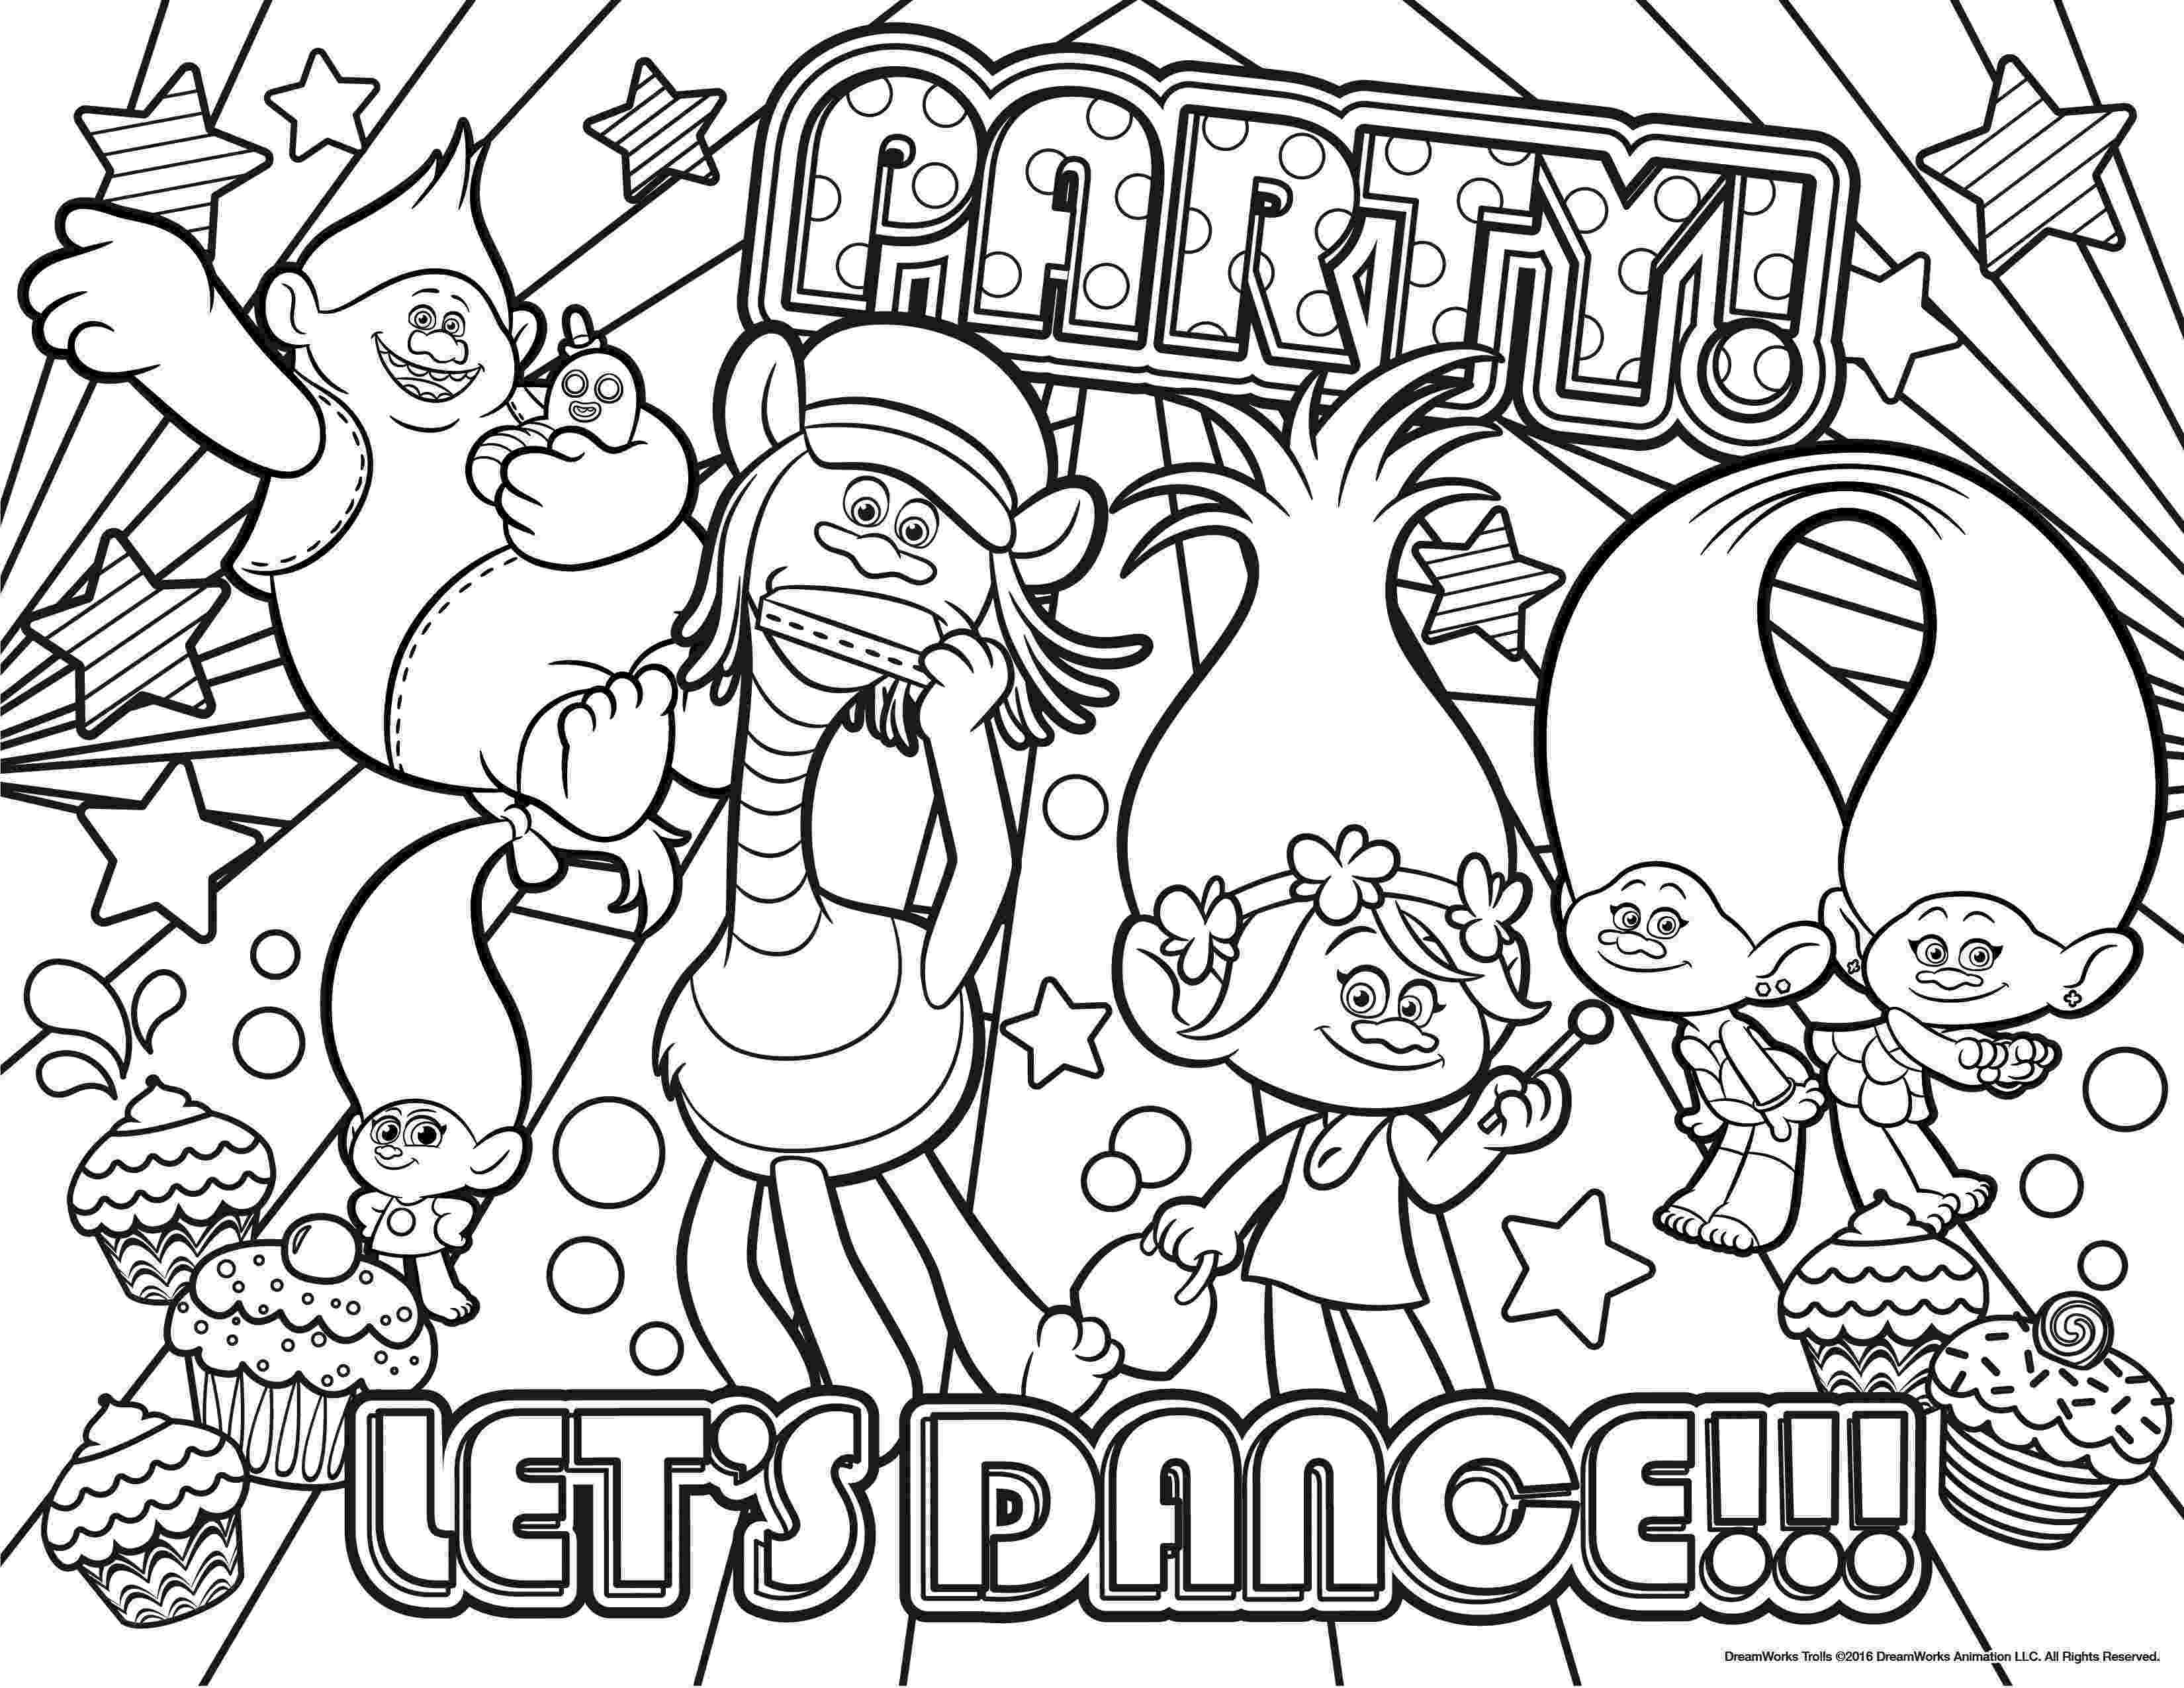 printable coloring pages trolls trolls coloringpage 02jpg 33002550 kolorowanki trolls printable pages coloring 